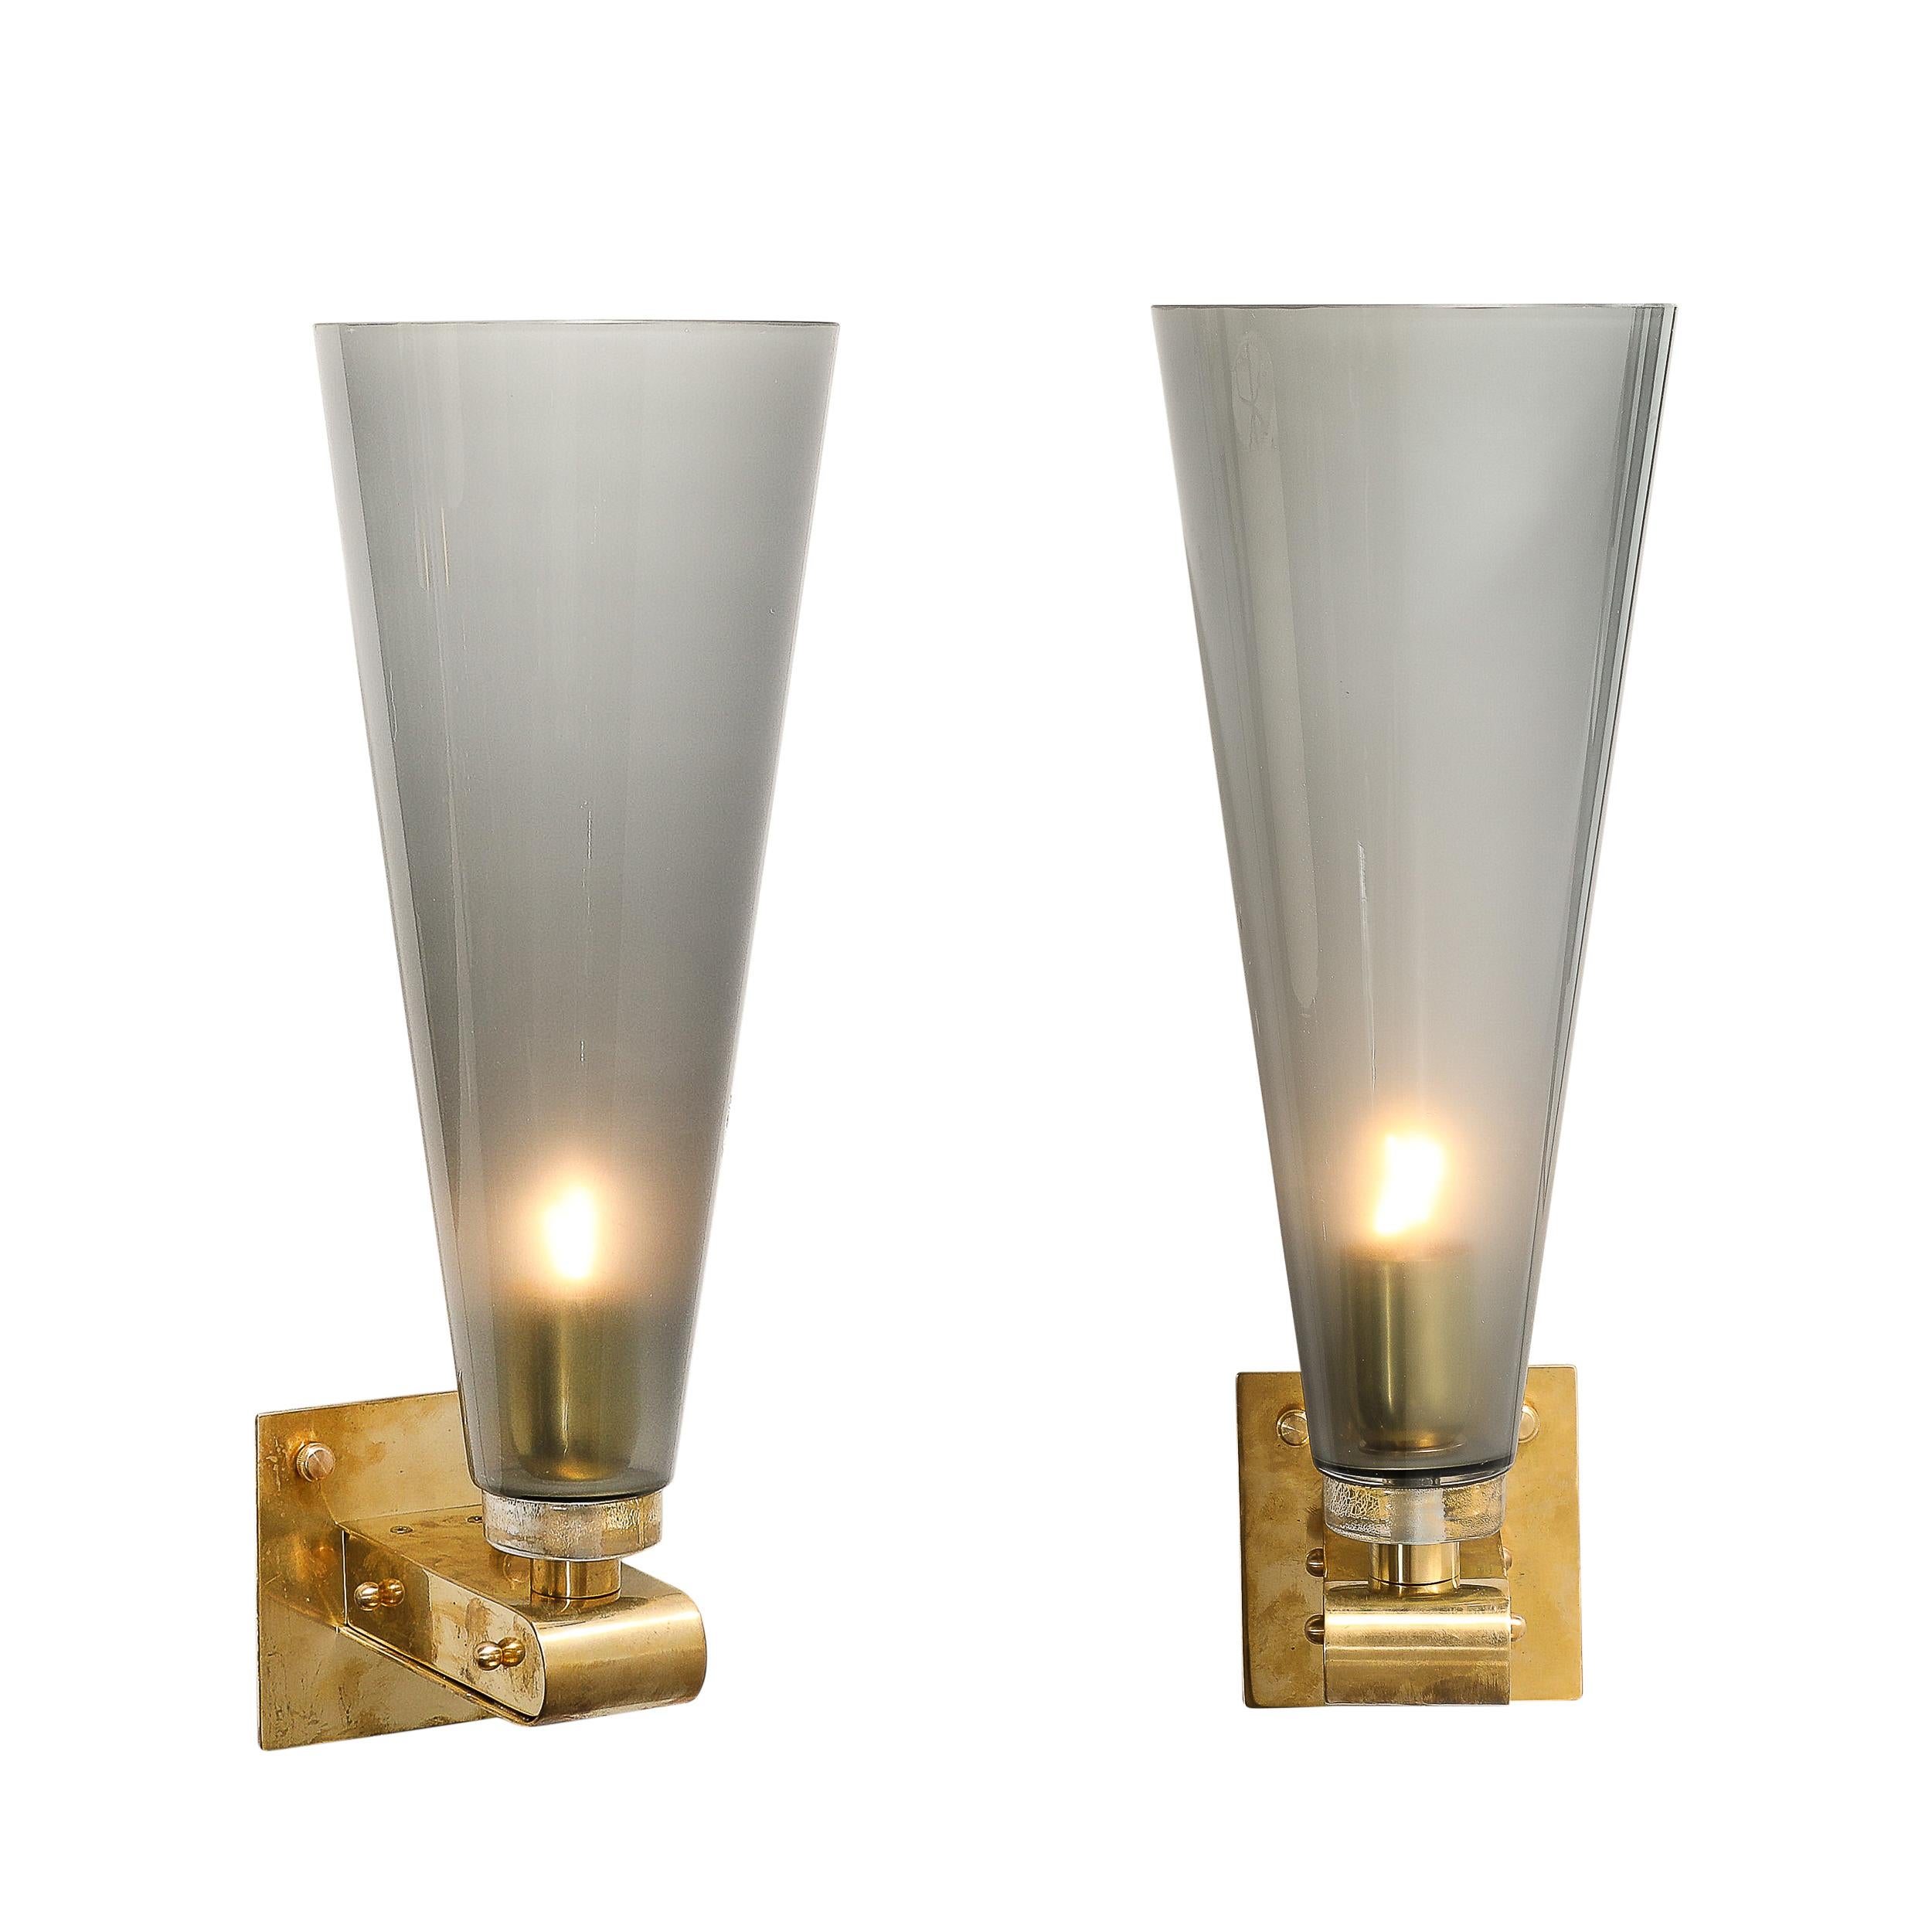 Italian Modernist Conical Smoked Graphite Hand-Blown Murano Glass & Brass Sconces For Sale